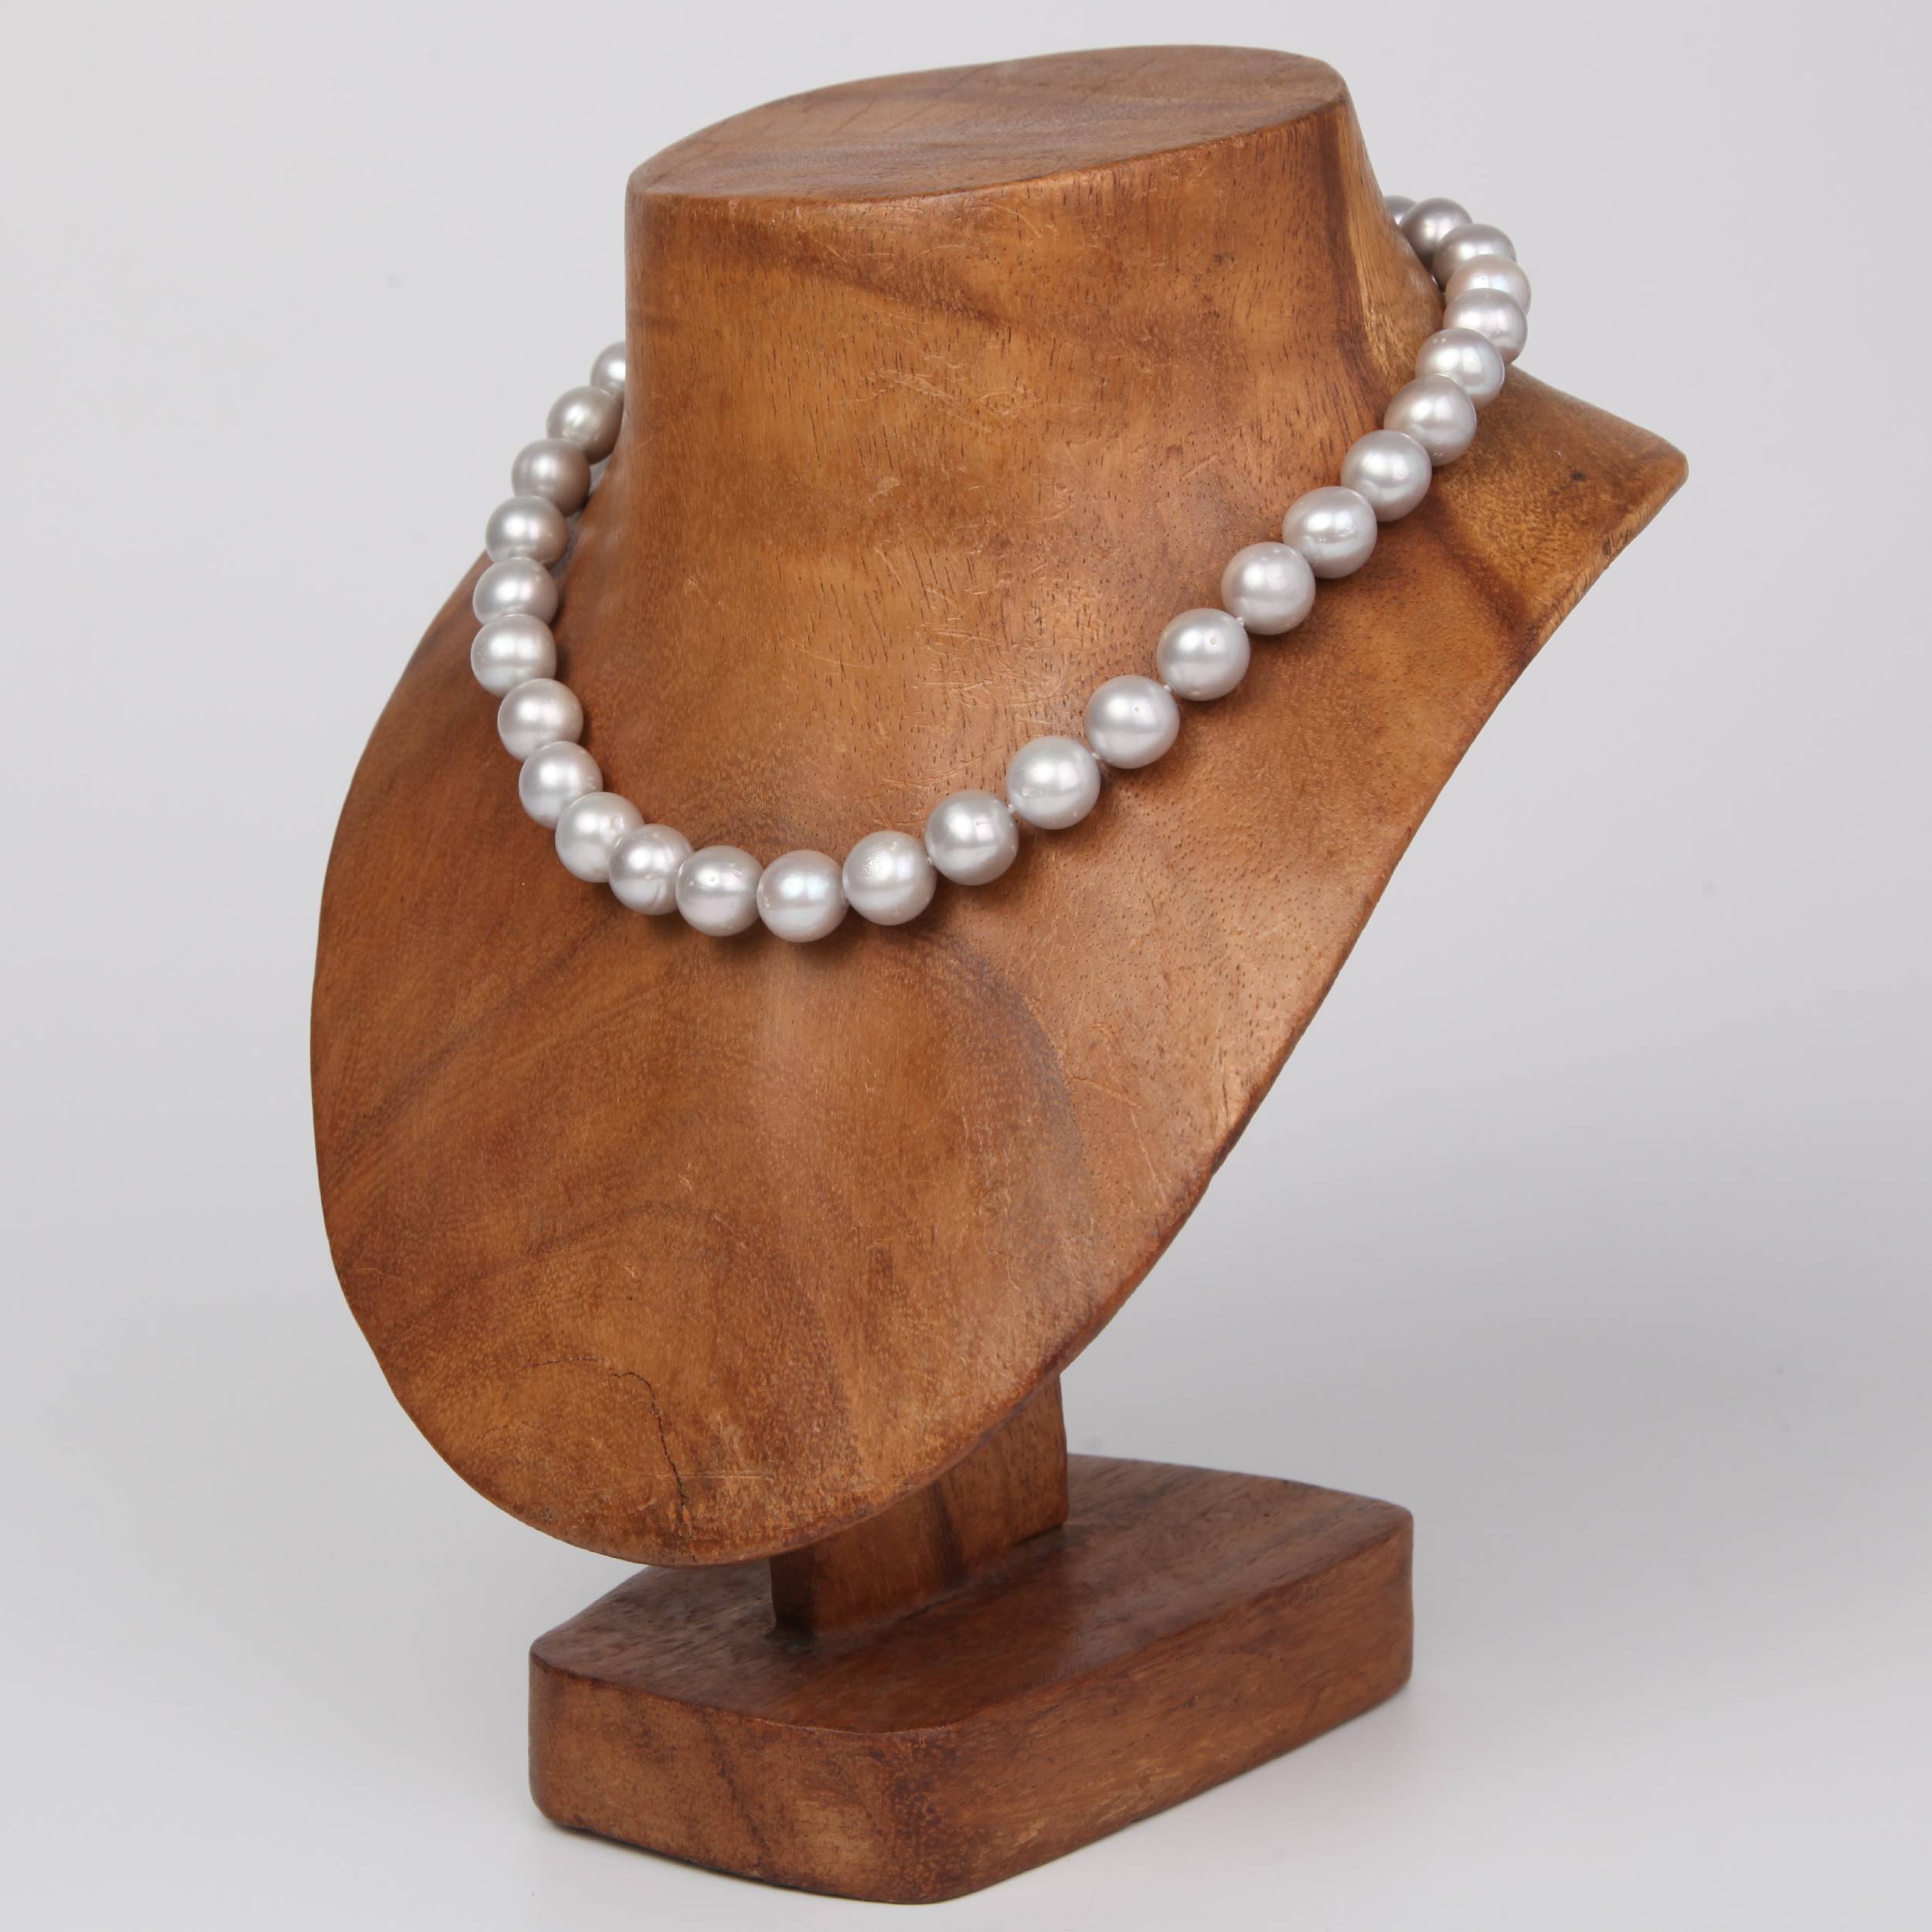 Silver Fresh Water Pearl Necklace with Sterling Silver